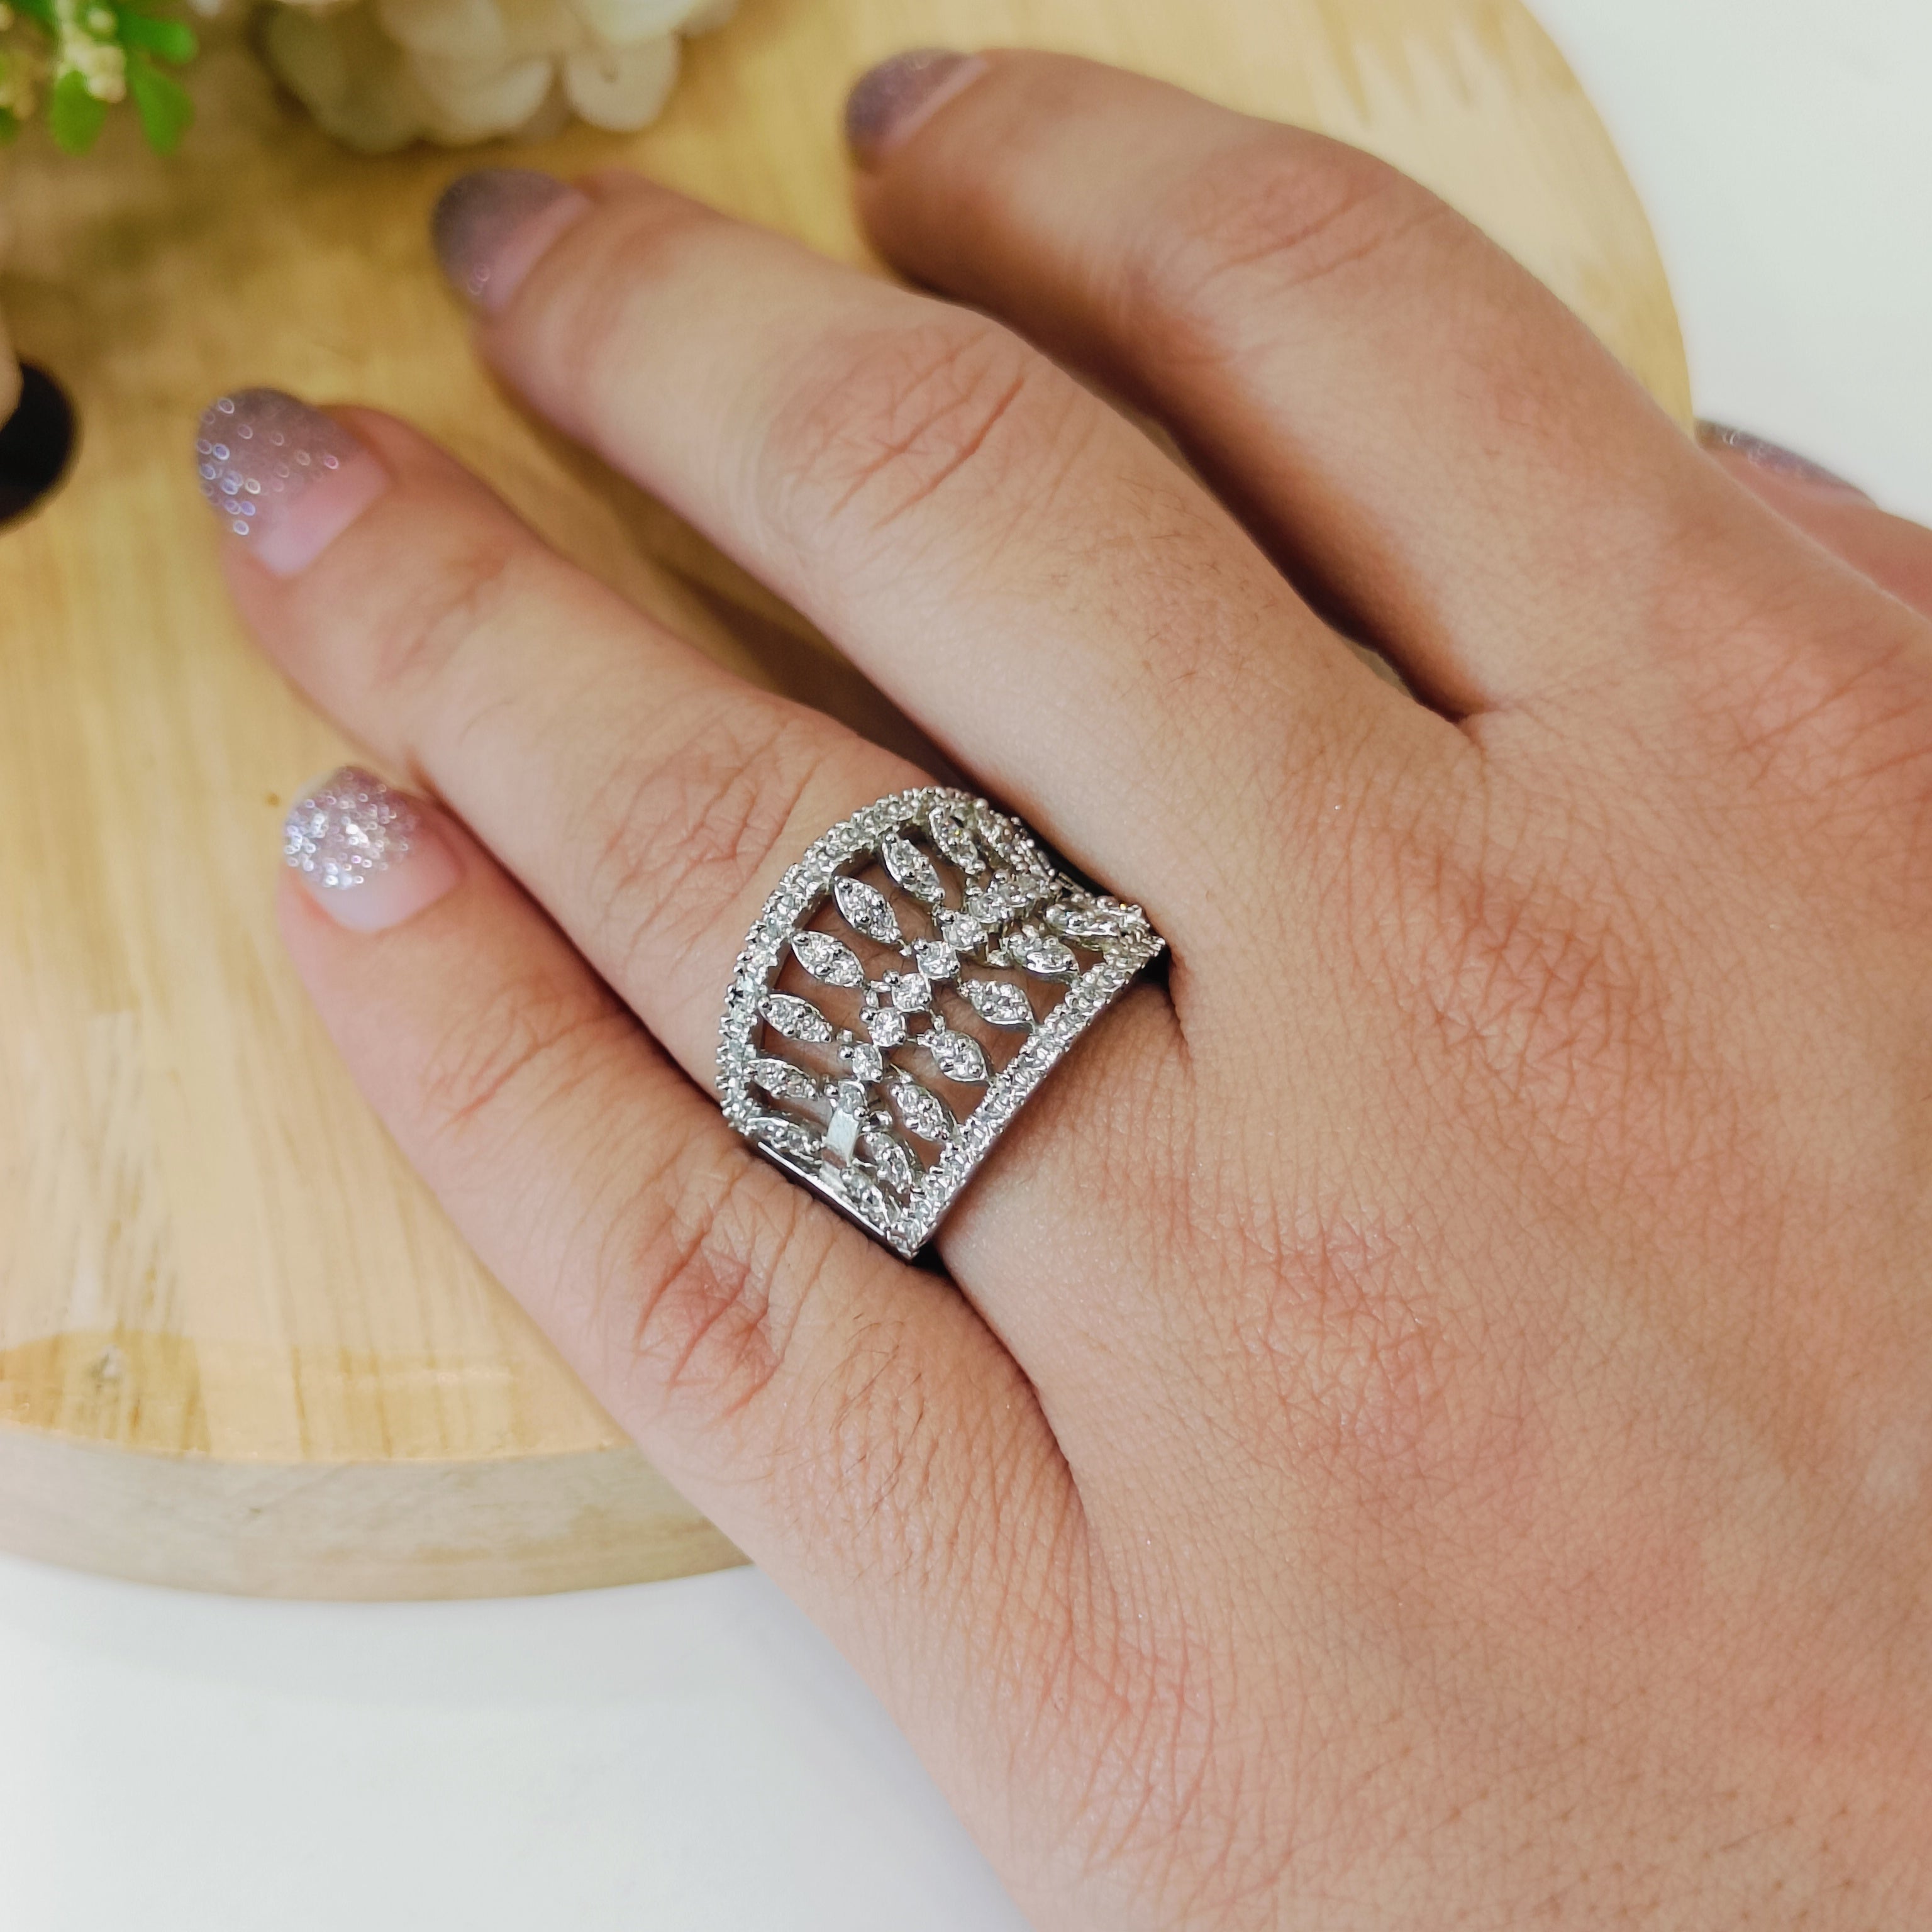 Vs sterling silver cocktail ring 176